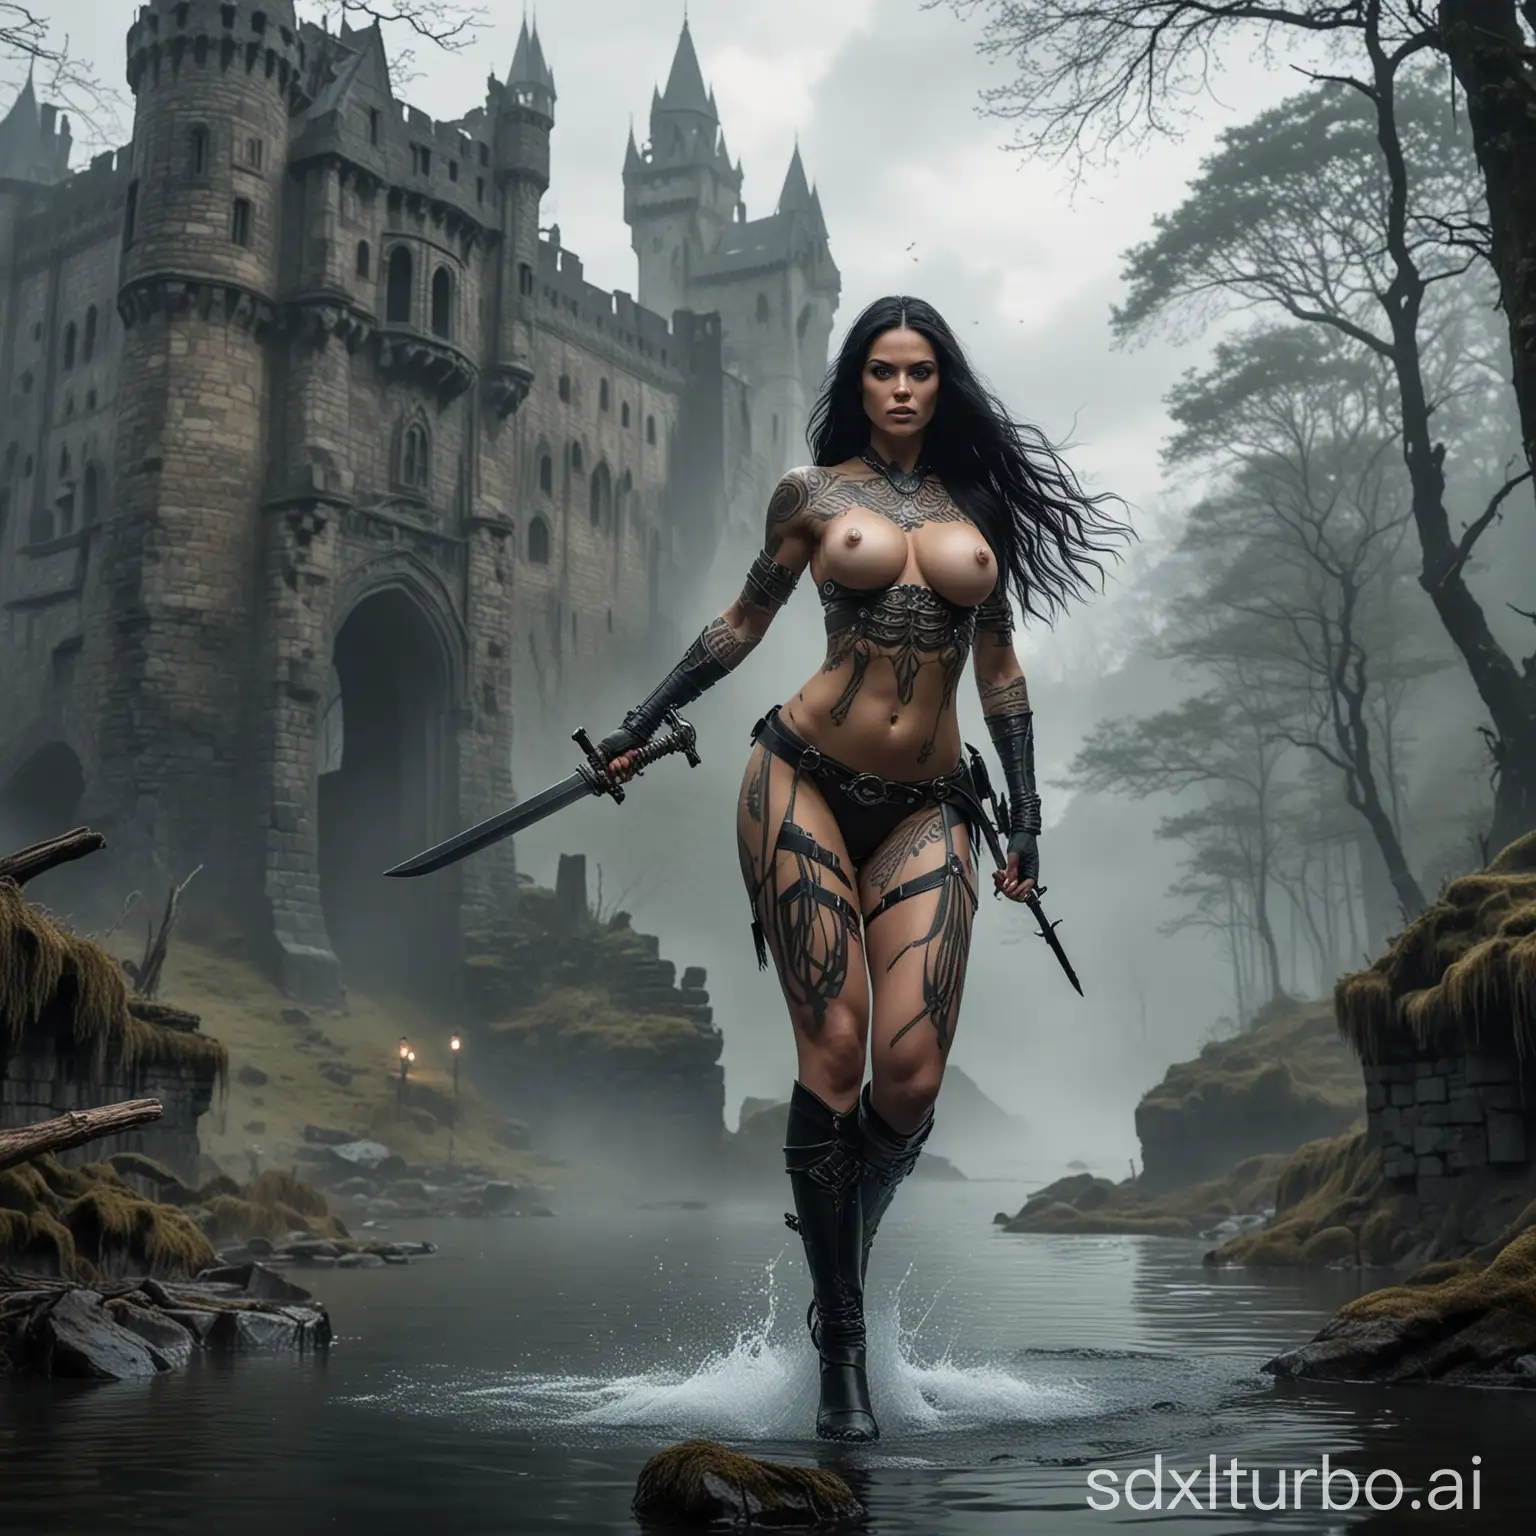 naked tall and muscular tattooed cyborg warrior with large breasts long black hair and a raised longsword above her head in her right hand jumps out of a dark icy lake surrounded by a dark misty ancient forest and a castle ruin in the background